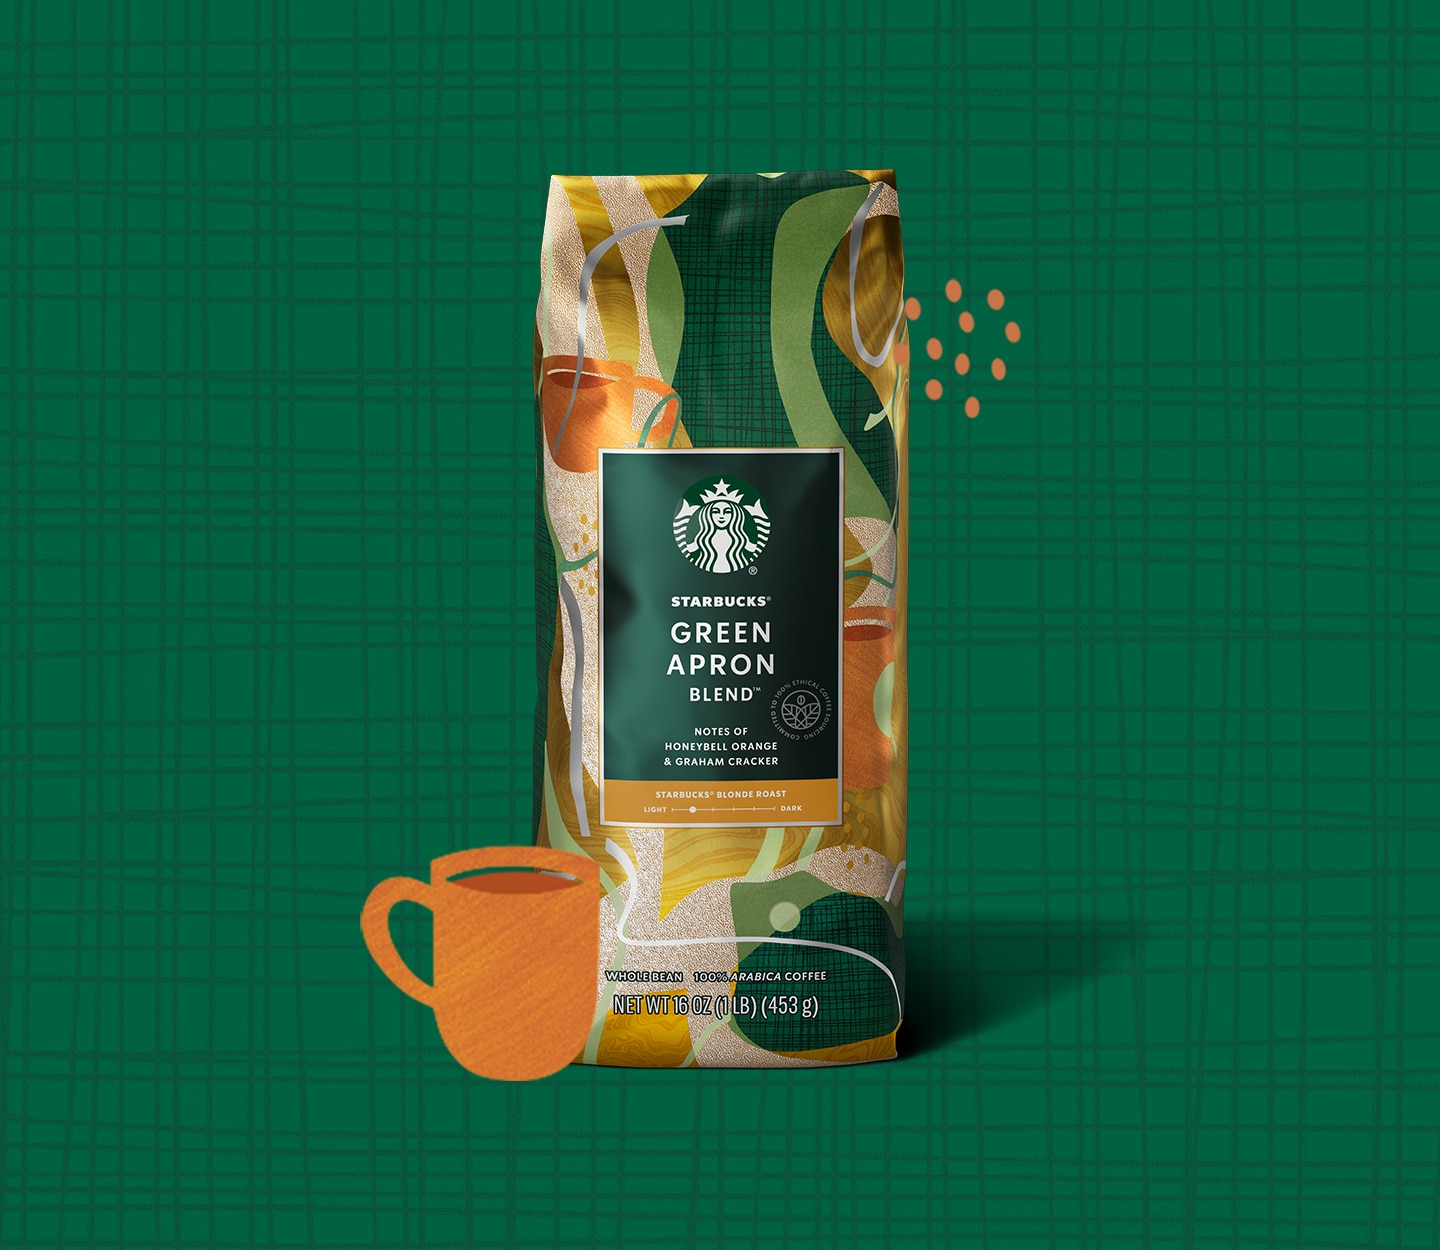 An illustrated cup of coffee sits next to a bag of Green Apron Blend coffee in front of a Starbucks green backdrop.